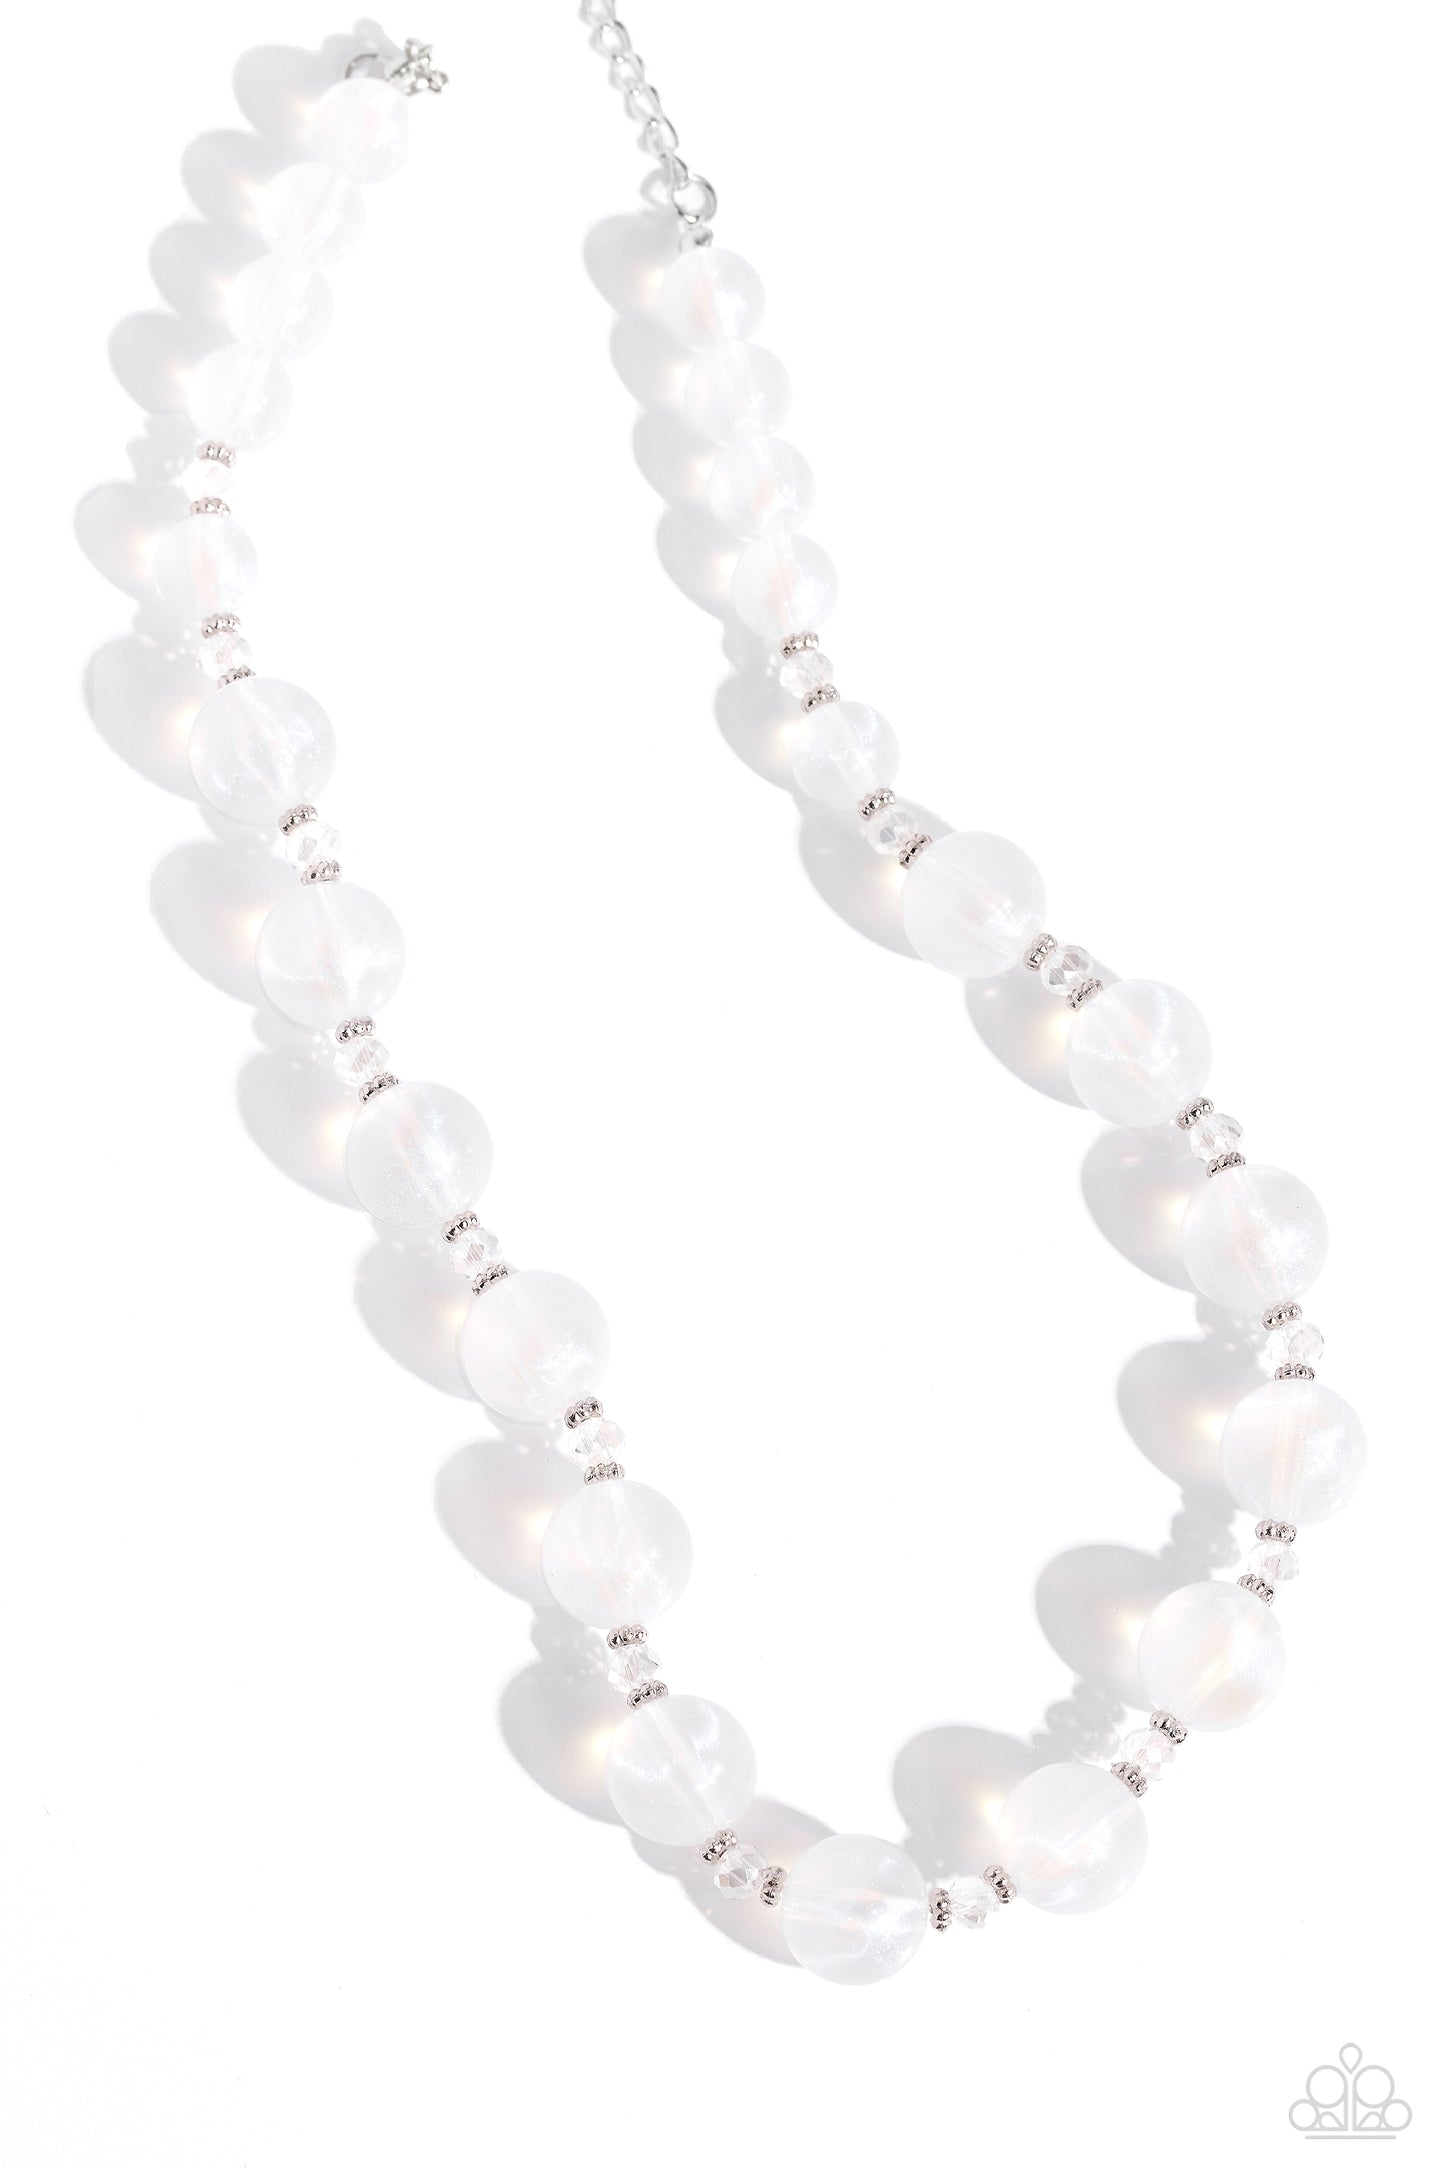 Timelessly Tantalizing White Necklace - Paparazzi Accessories  Infused with dainty silver accents and faceted clear beads, a collection of white opalescent beads, brushed in an iridescent shimmer are threaded along an invisible wire below the collar for a timeless look. Features an adjustable clasp closure. Due to its prismatic palette, color may vary.  Sold as one individual necklace. Includes one pair of matching earrings.  P2WH-WTXX-316XX